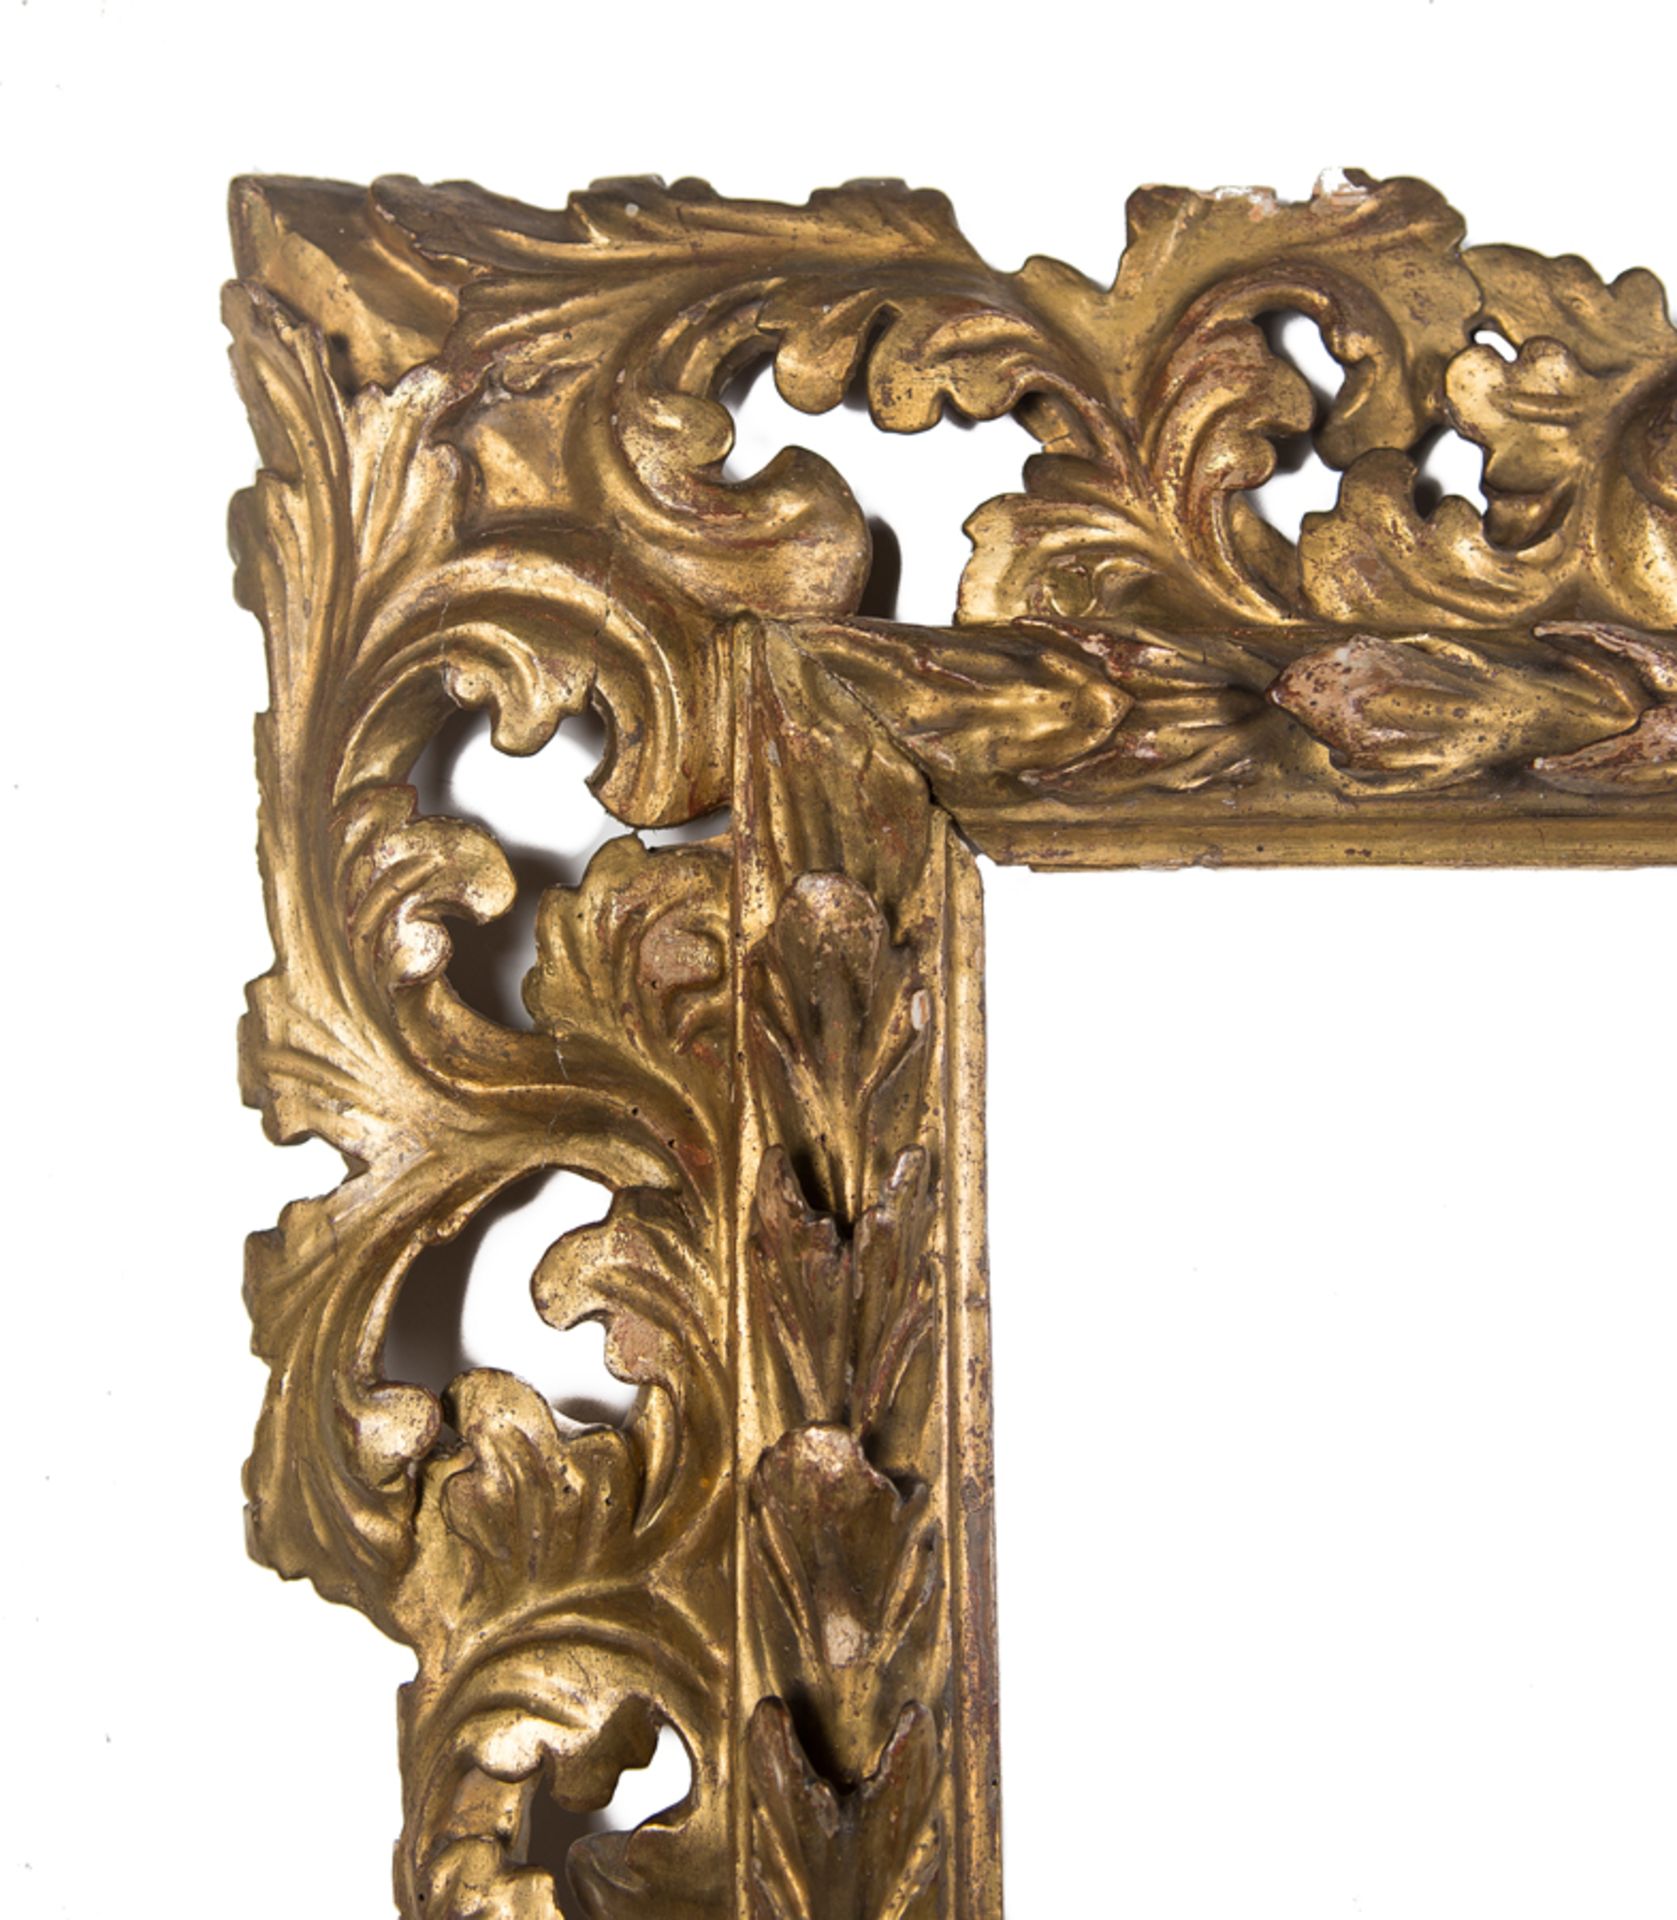 Carved and gilded wooden frame. Italian work. 17th - 18th century. - Image 2 of 4